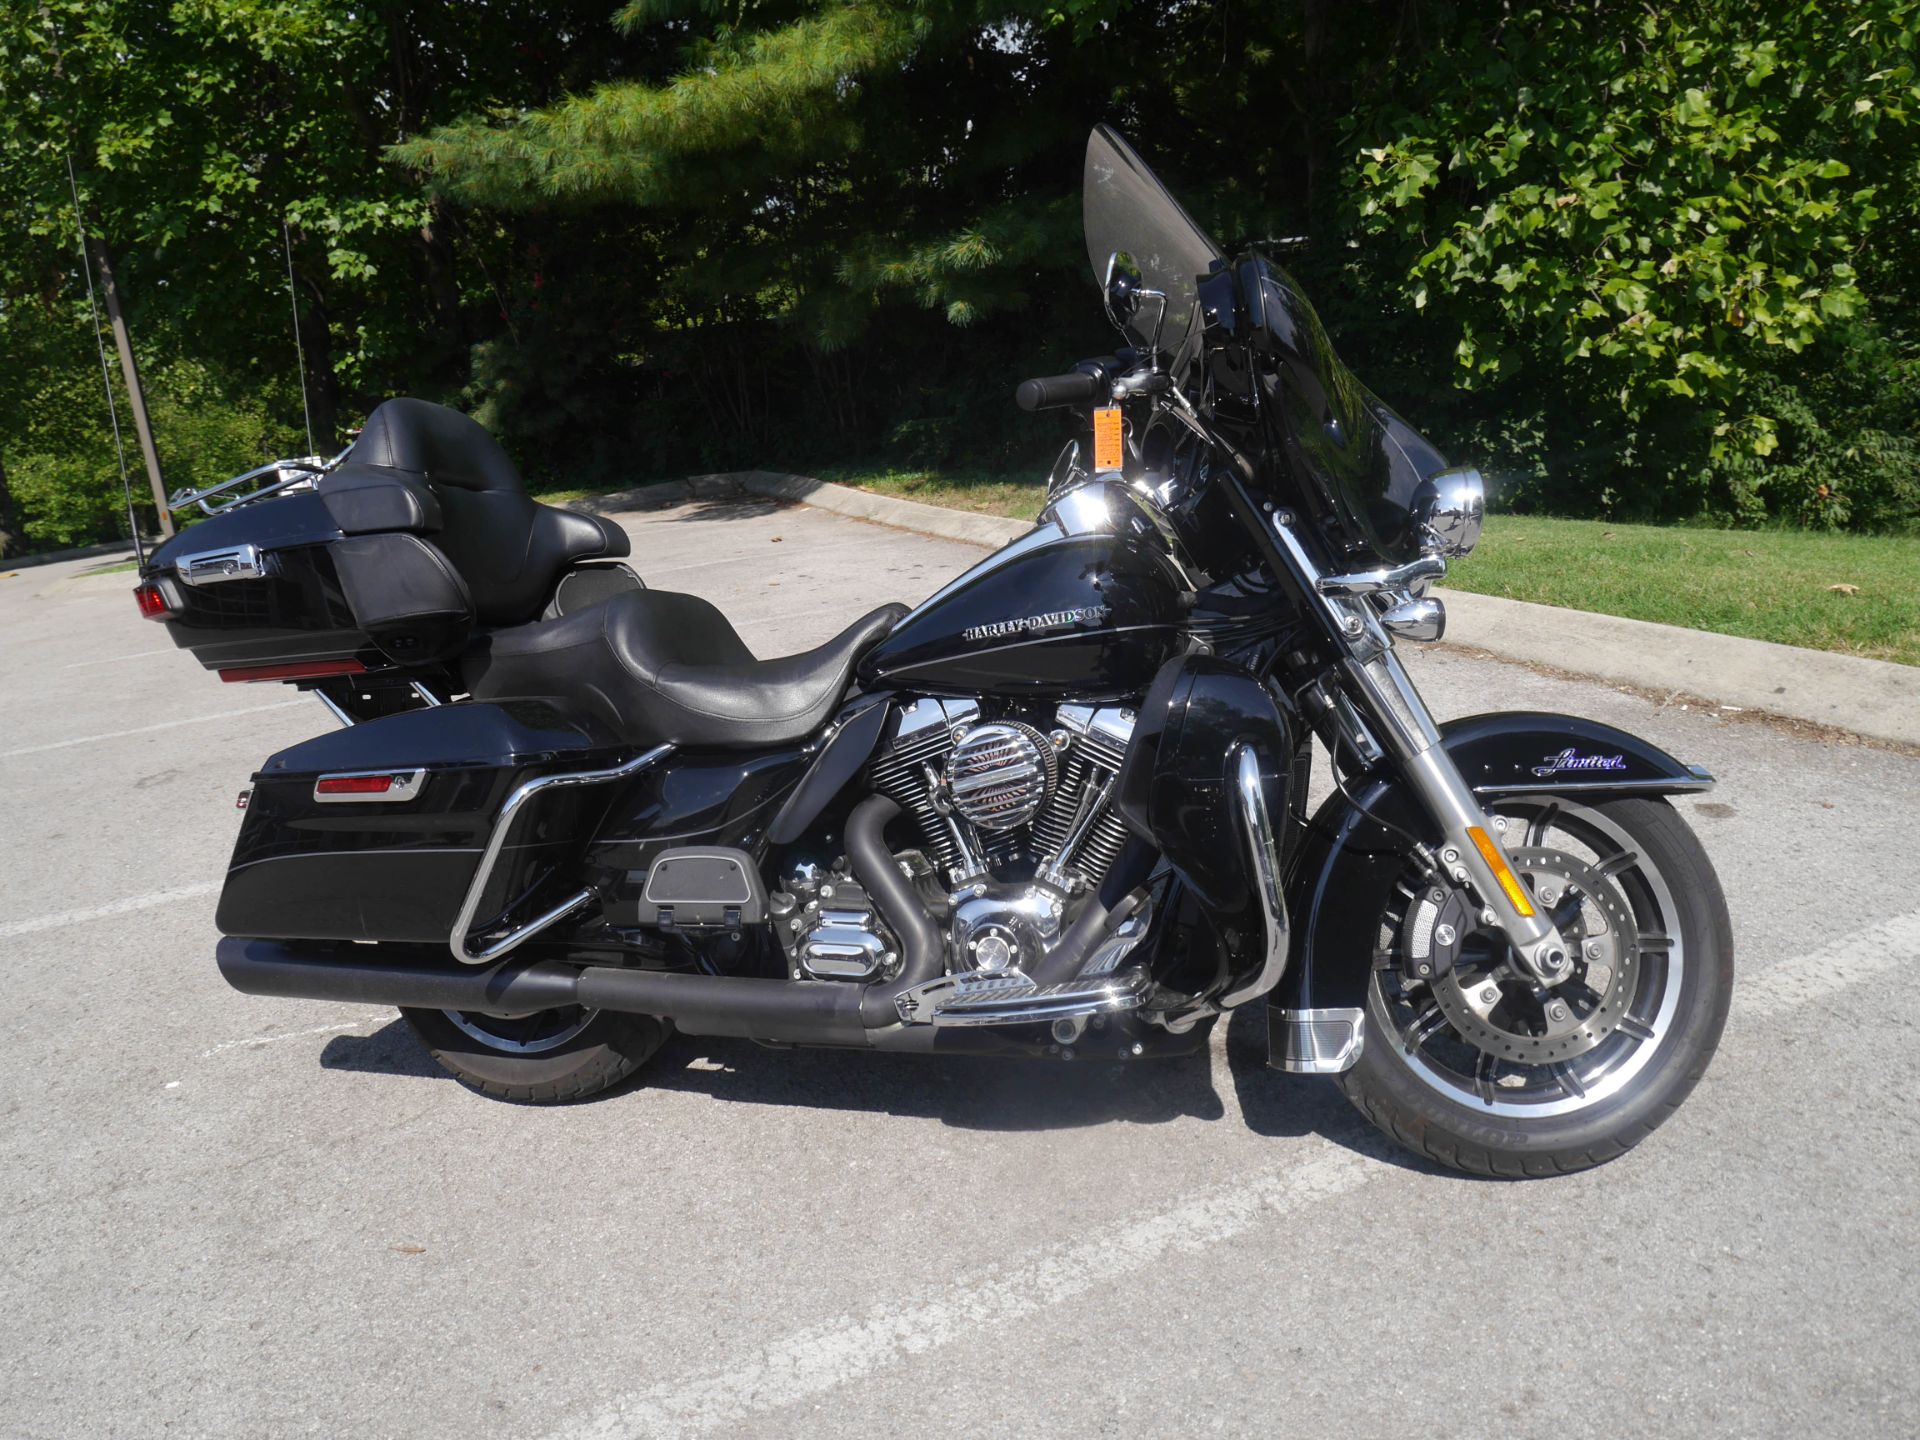 2015 Harley-Davidson Ultra Limited in Franklin, Tennessee - Photo 8